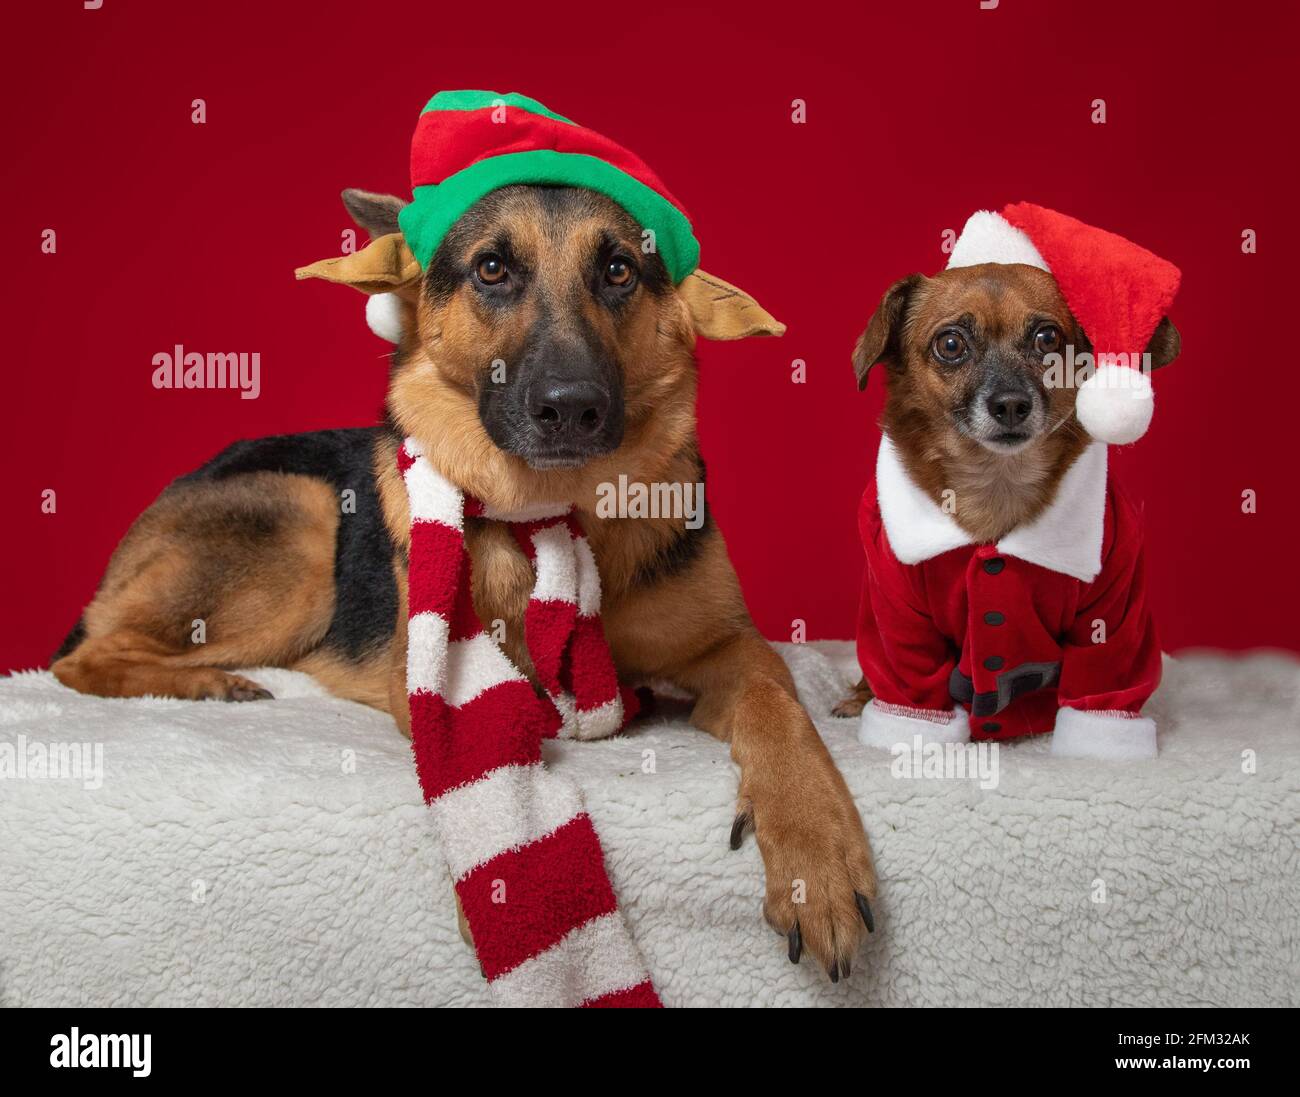 German Shepherd and mixed breed dog dressed in Christmas outfits Stock Photo